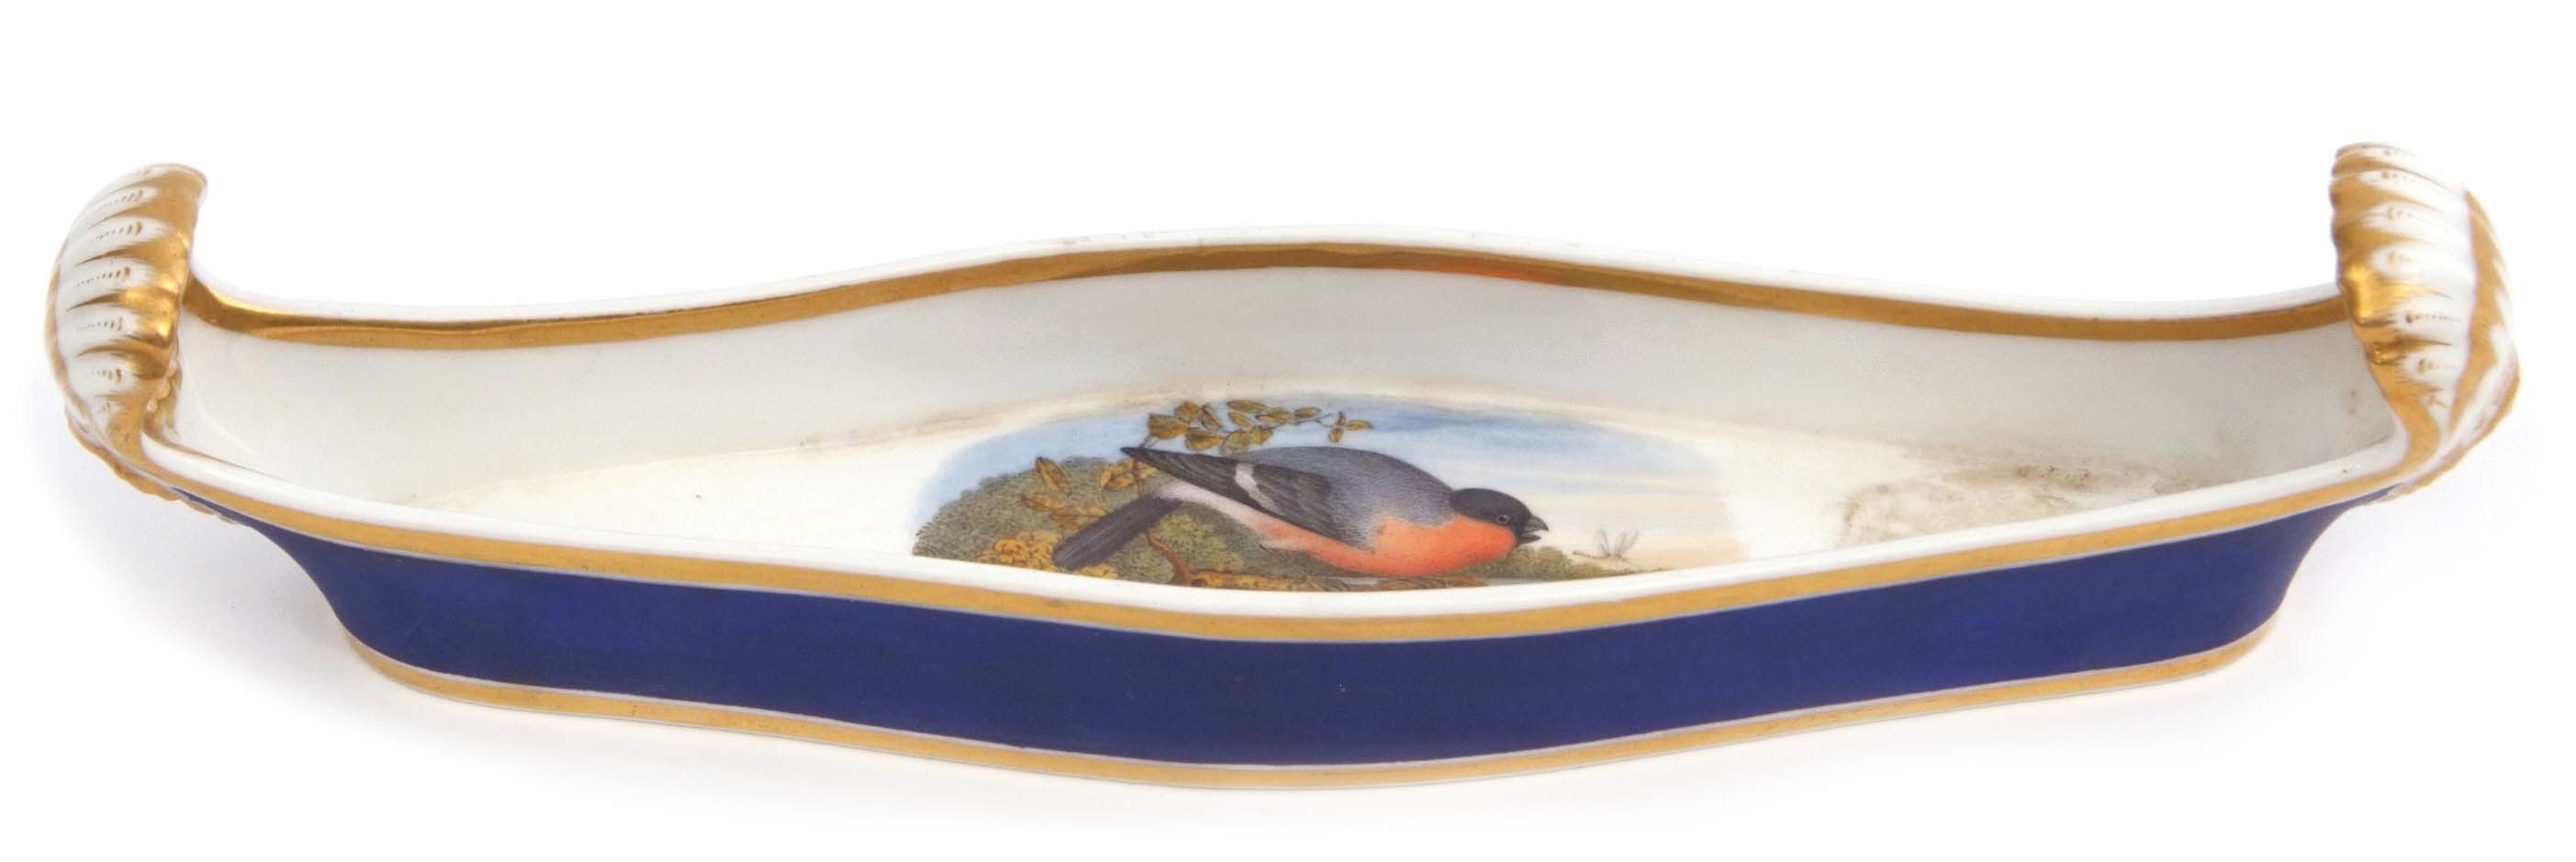 Chamberlains Worcester pen tray, the boat shape decorated with a bullfinch, factory mark and